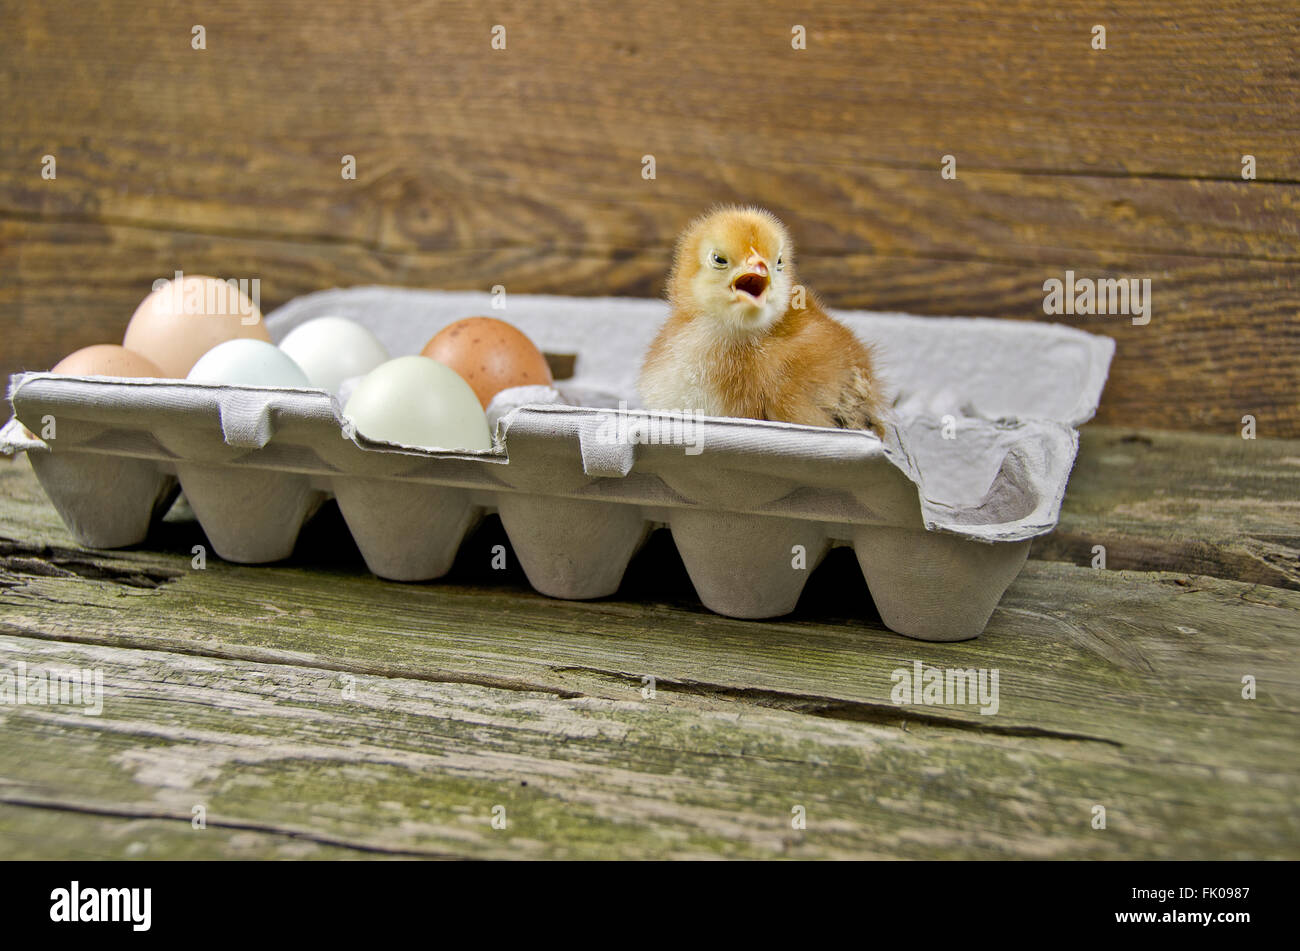 Baby chick and fresh eggs in gray egg carton on rustic wood. Stock Photo